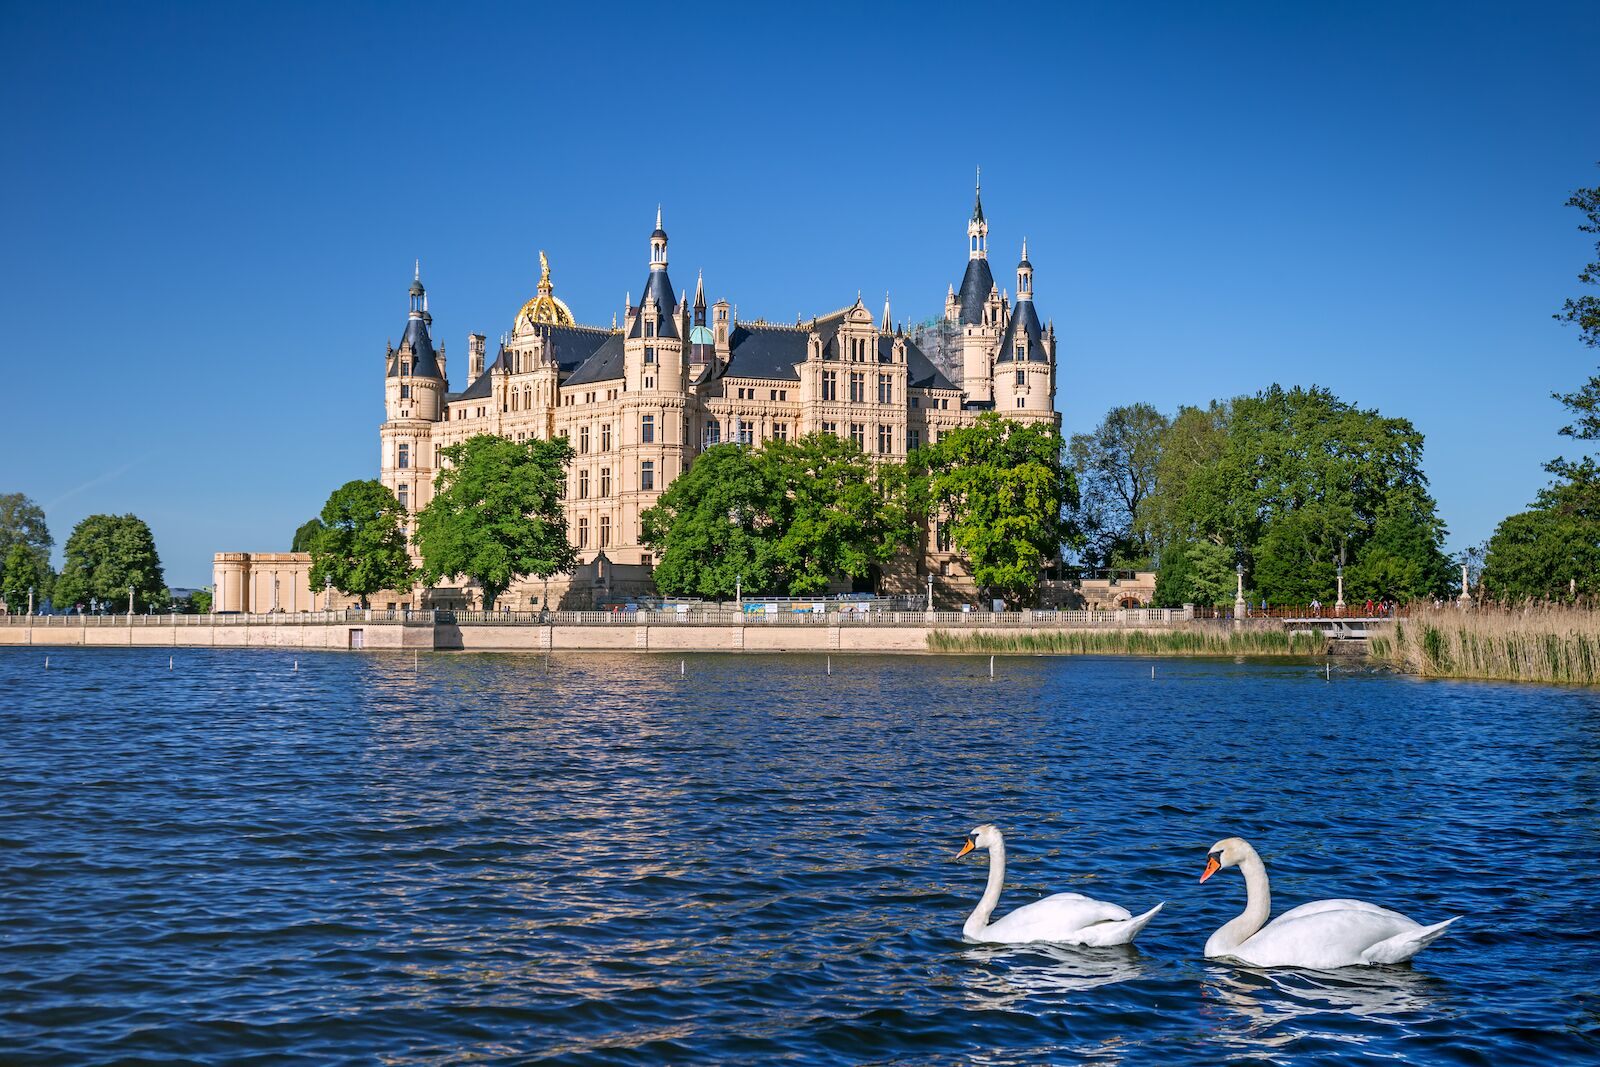 View of the Schwerin medieval castle from the lake with swans, Germany